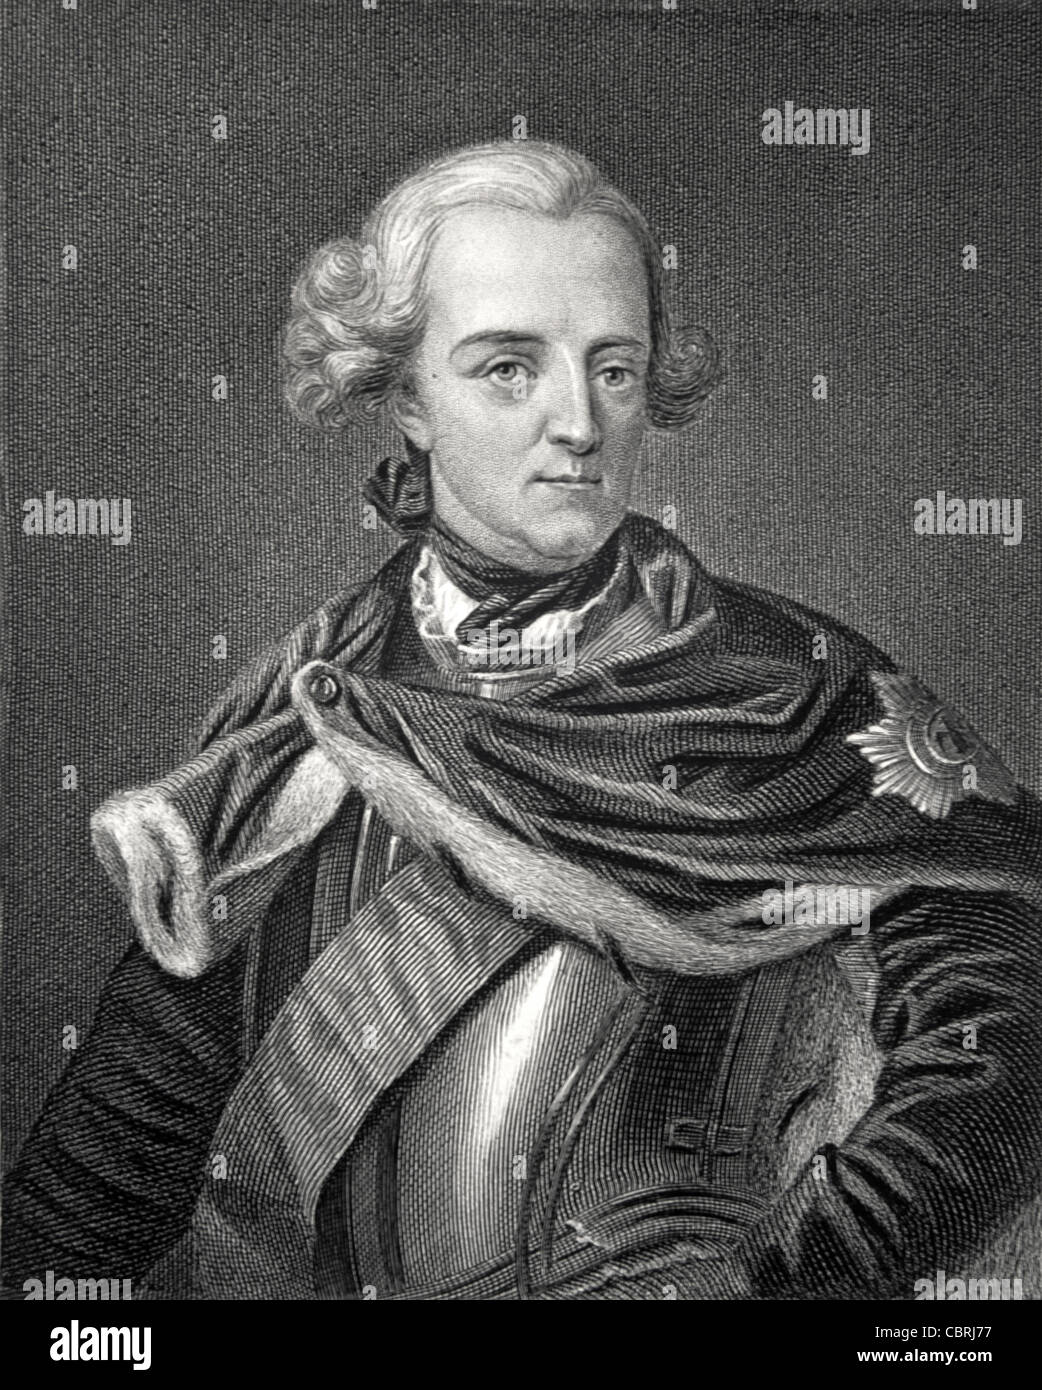 Portrait of Frederick the Great, Frederick II, King of Prussia (1740-1786) Portrait. c19th Engraving or Vintage Illustration Stock Photo